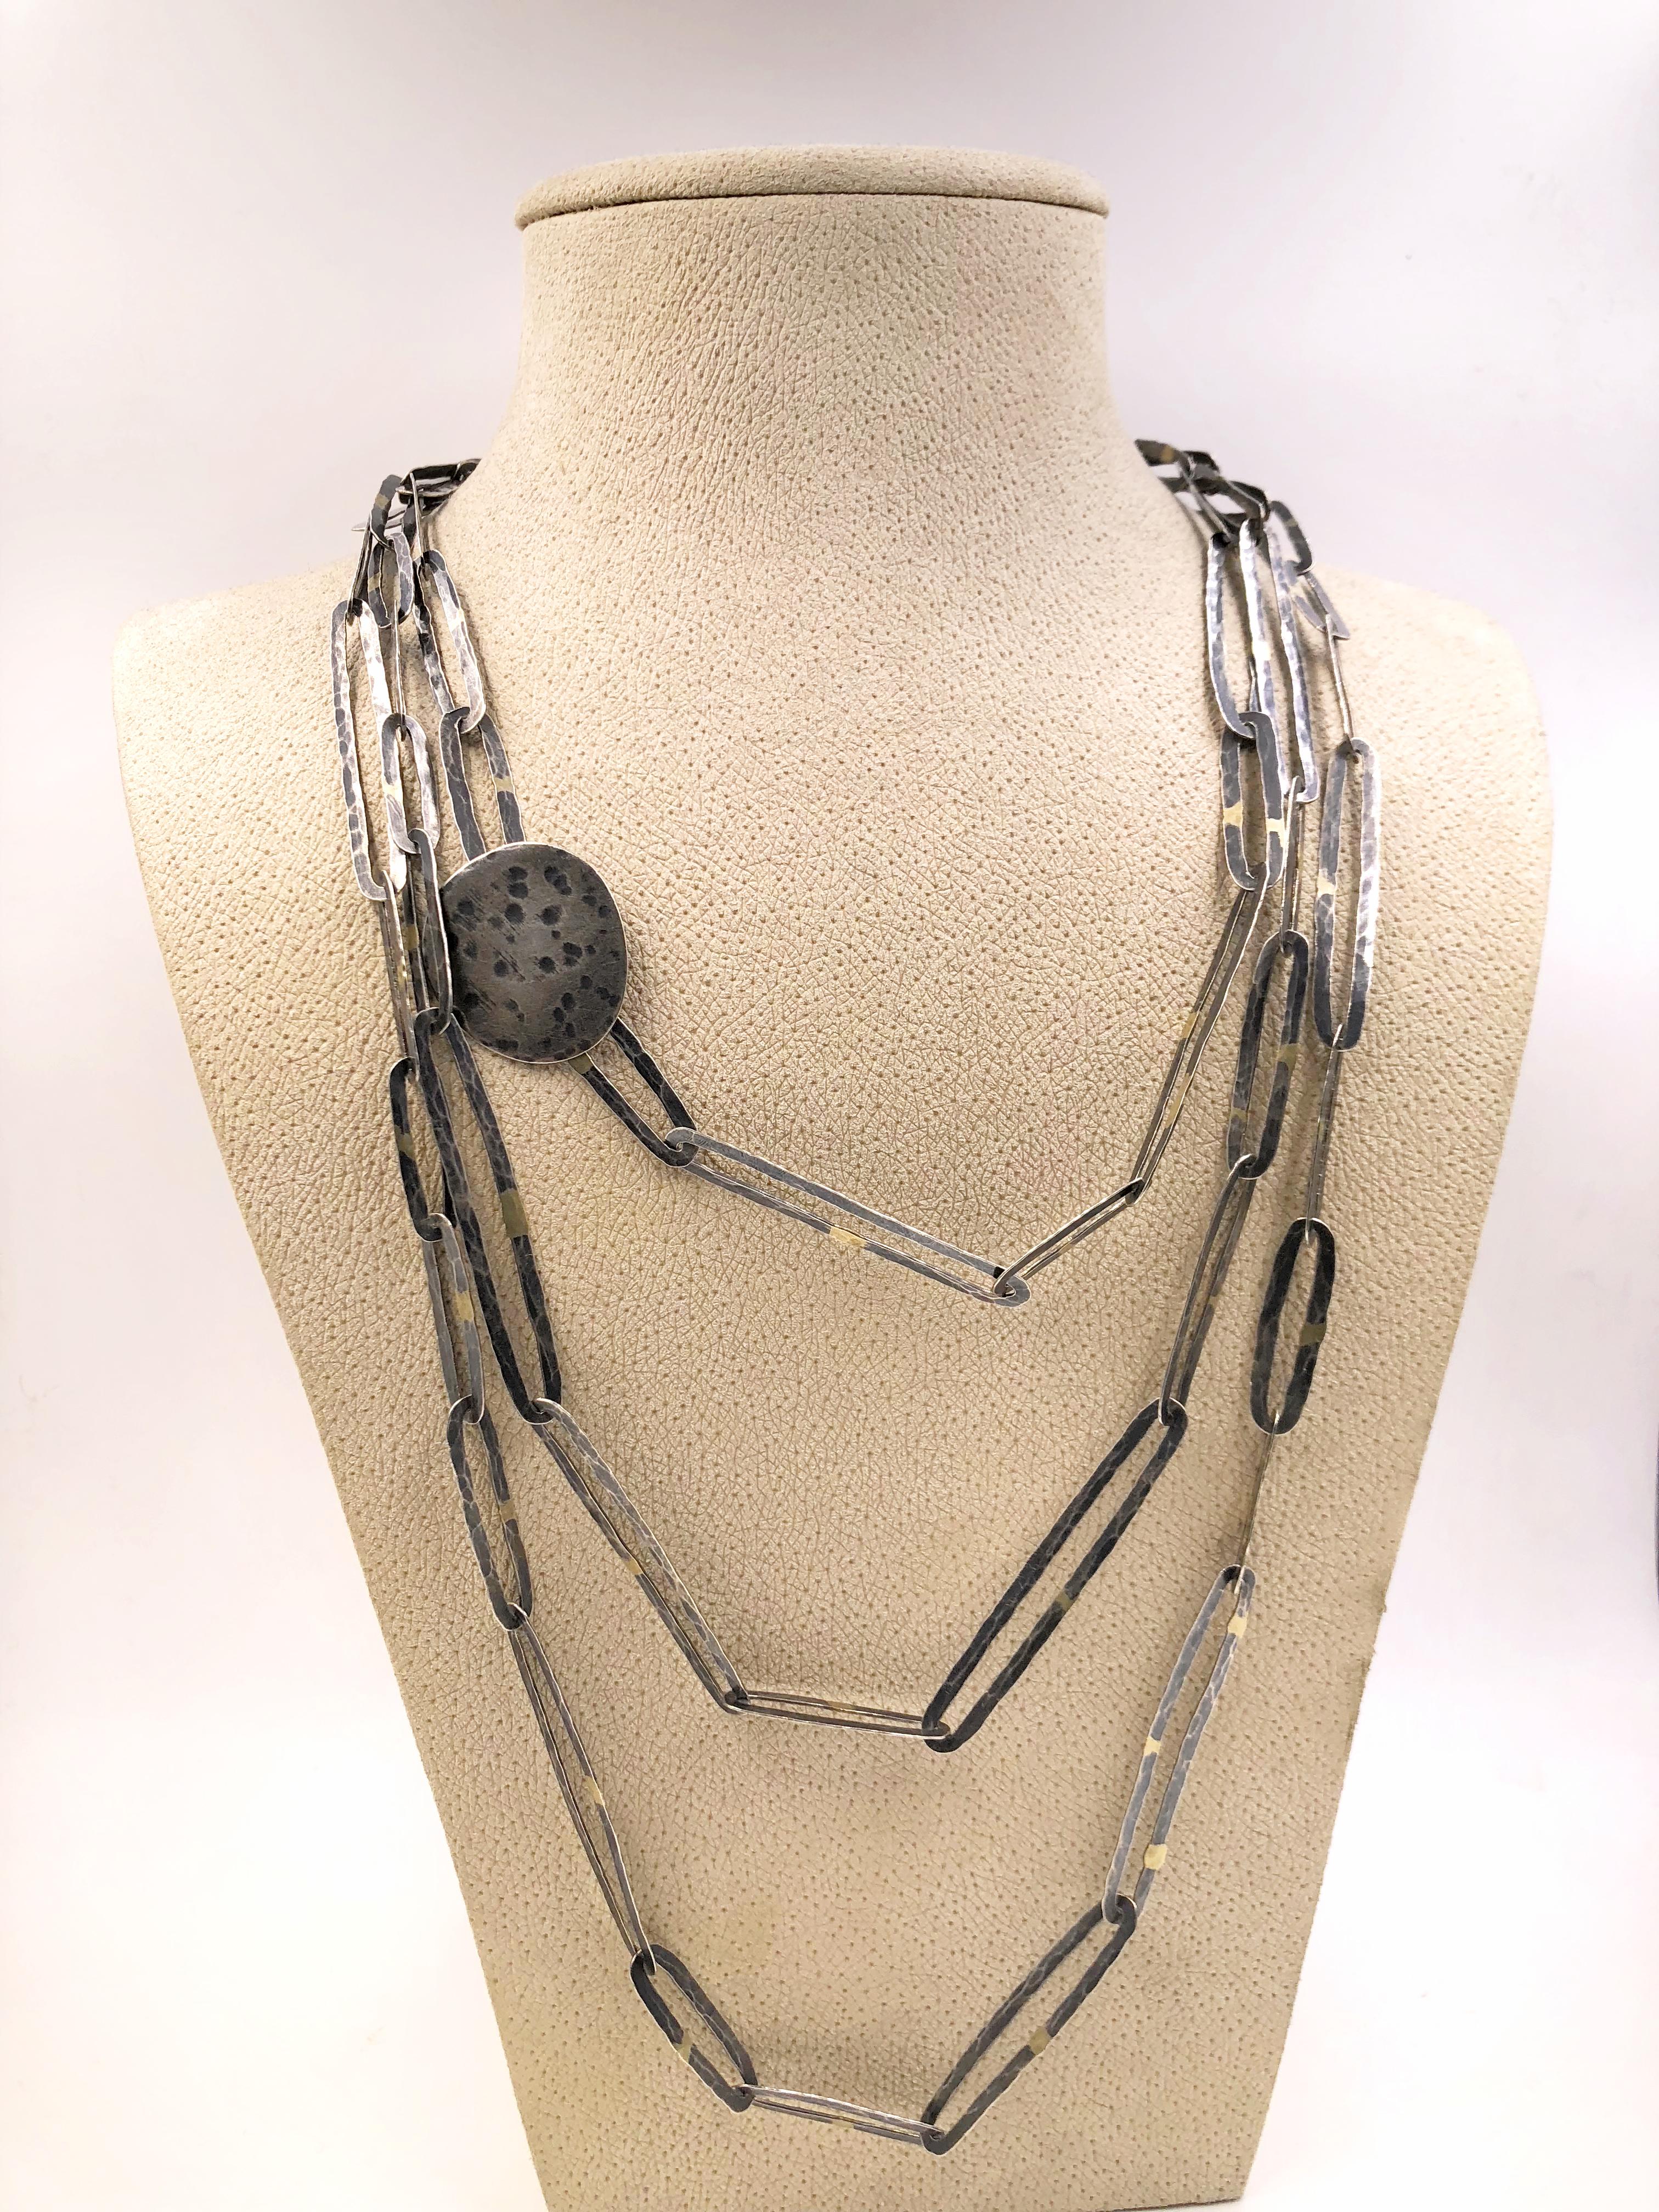 Artist John Iversen Extra Long One of a Kind Oxidized Silver Gold Chain Link Necklace